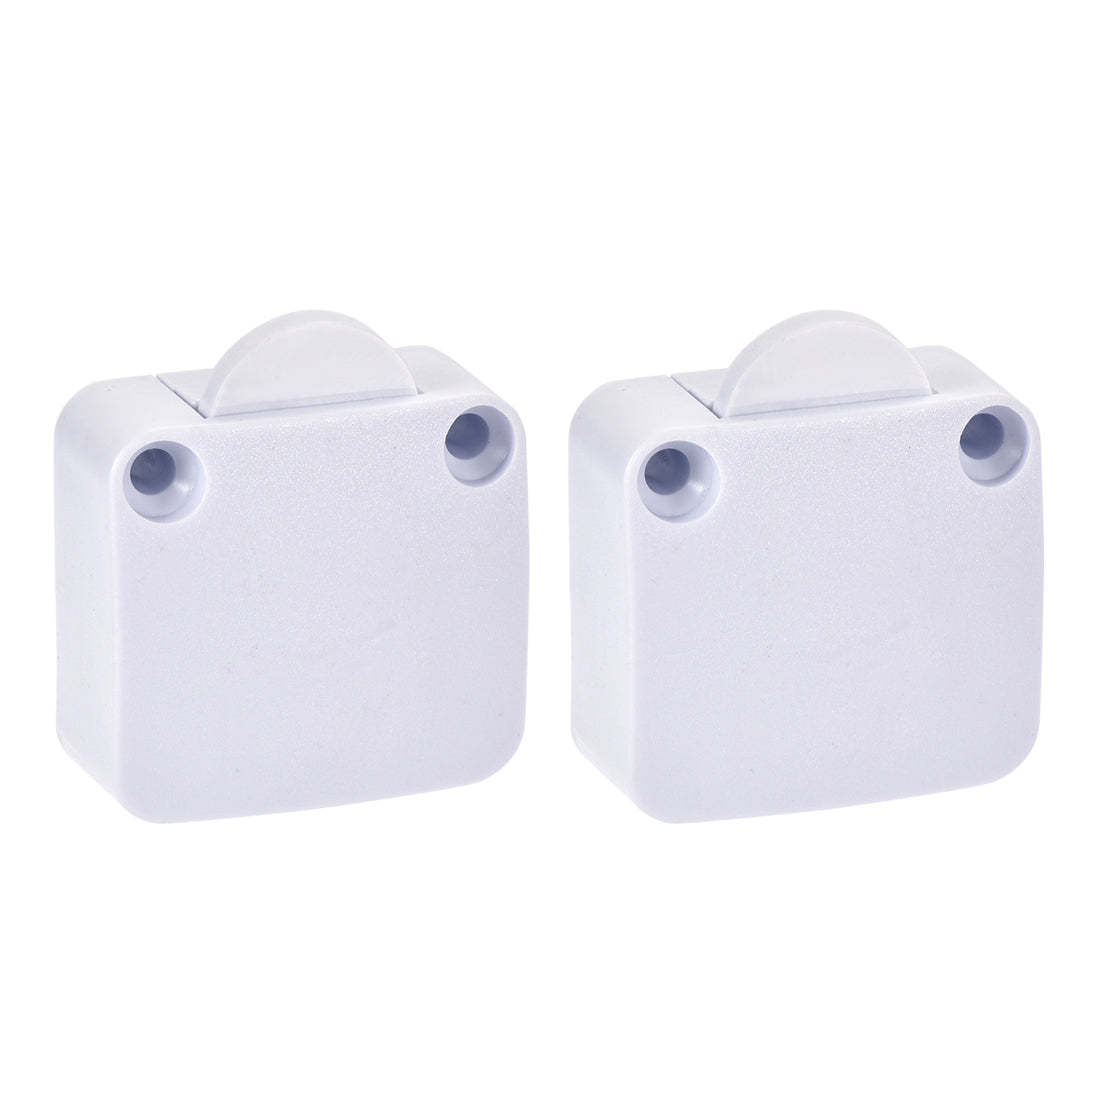 uxcell Uxcell Wardrobe Door Lamp Switch Momentary Closet Switches Normally Closed 110-250V 2A White 2 Pcs